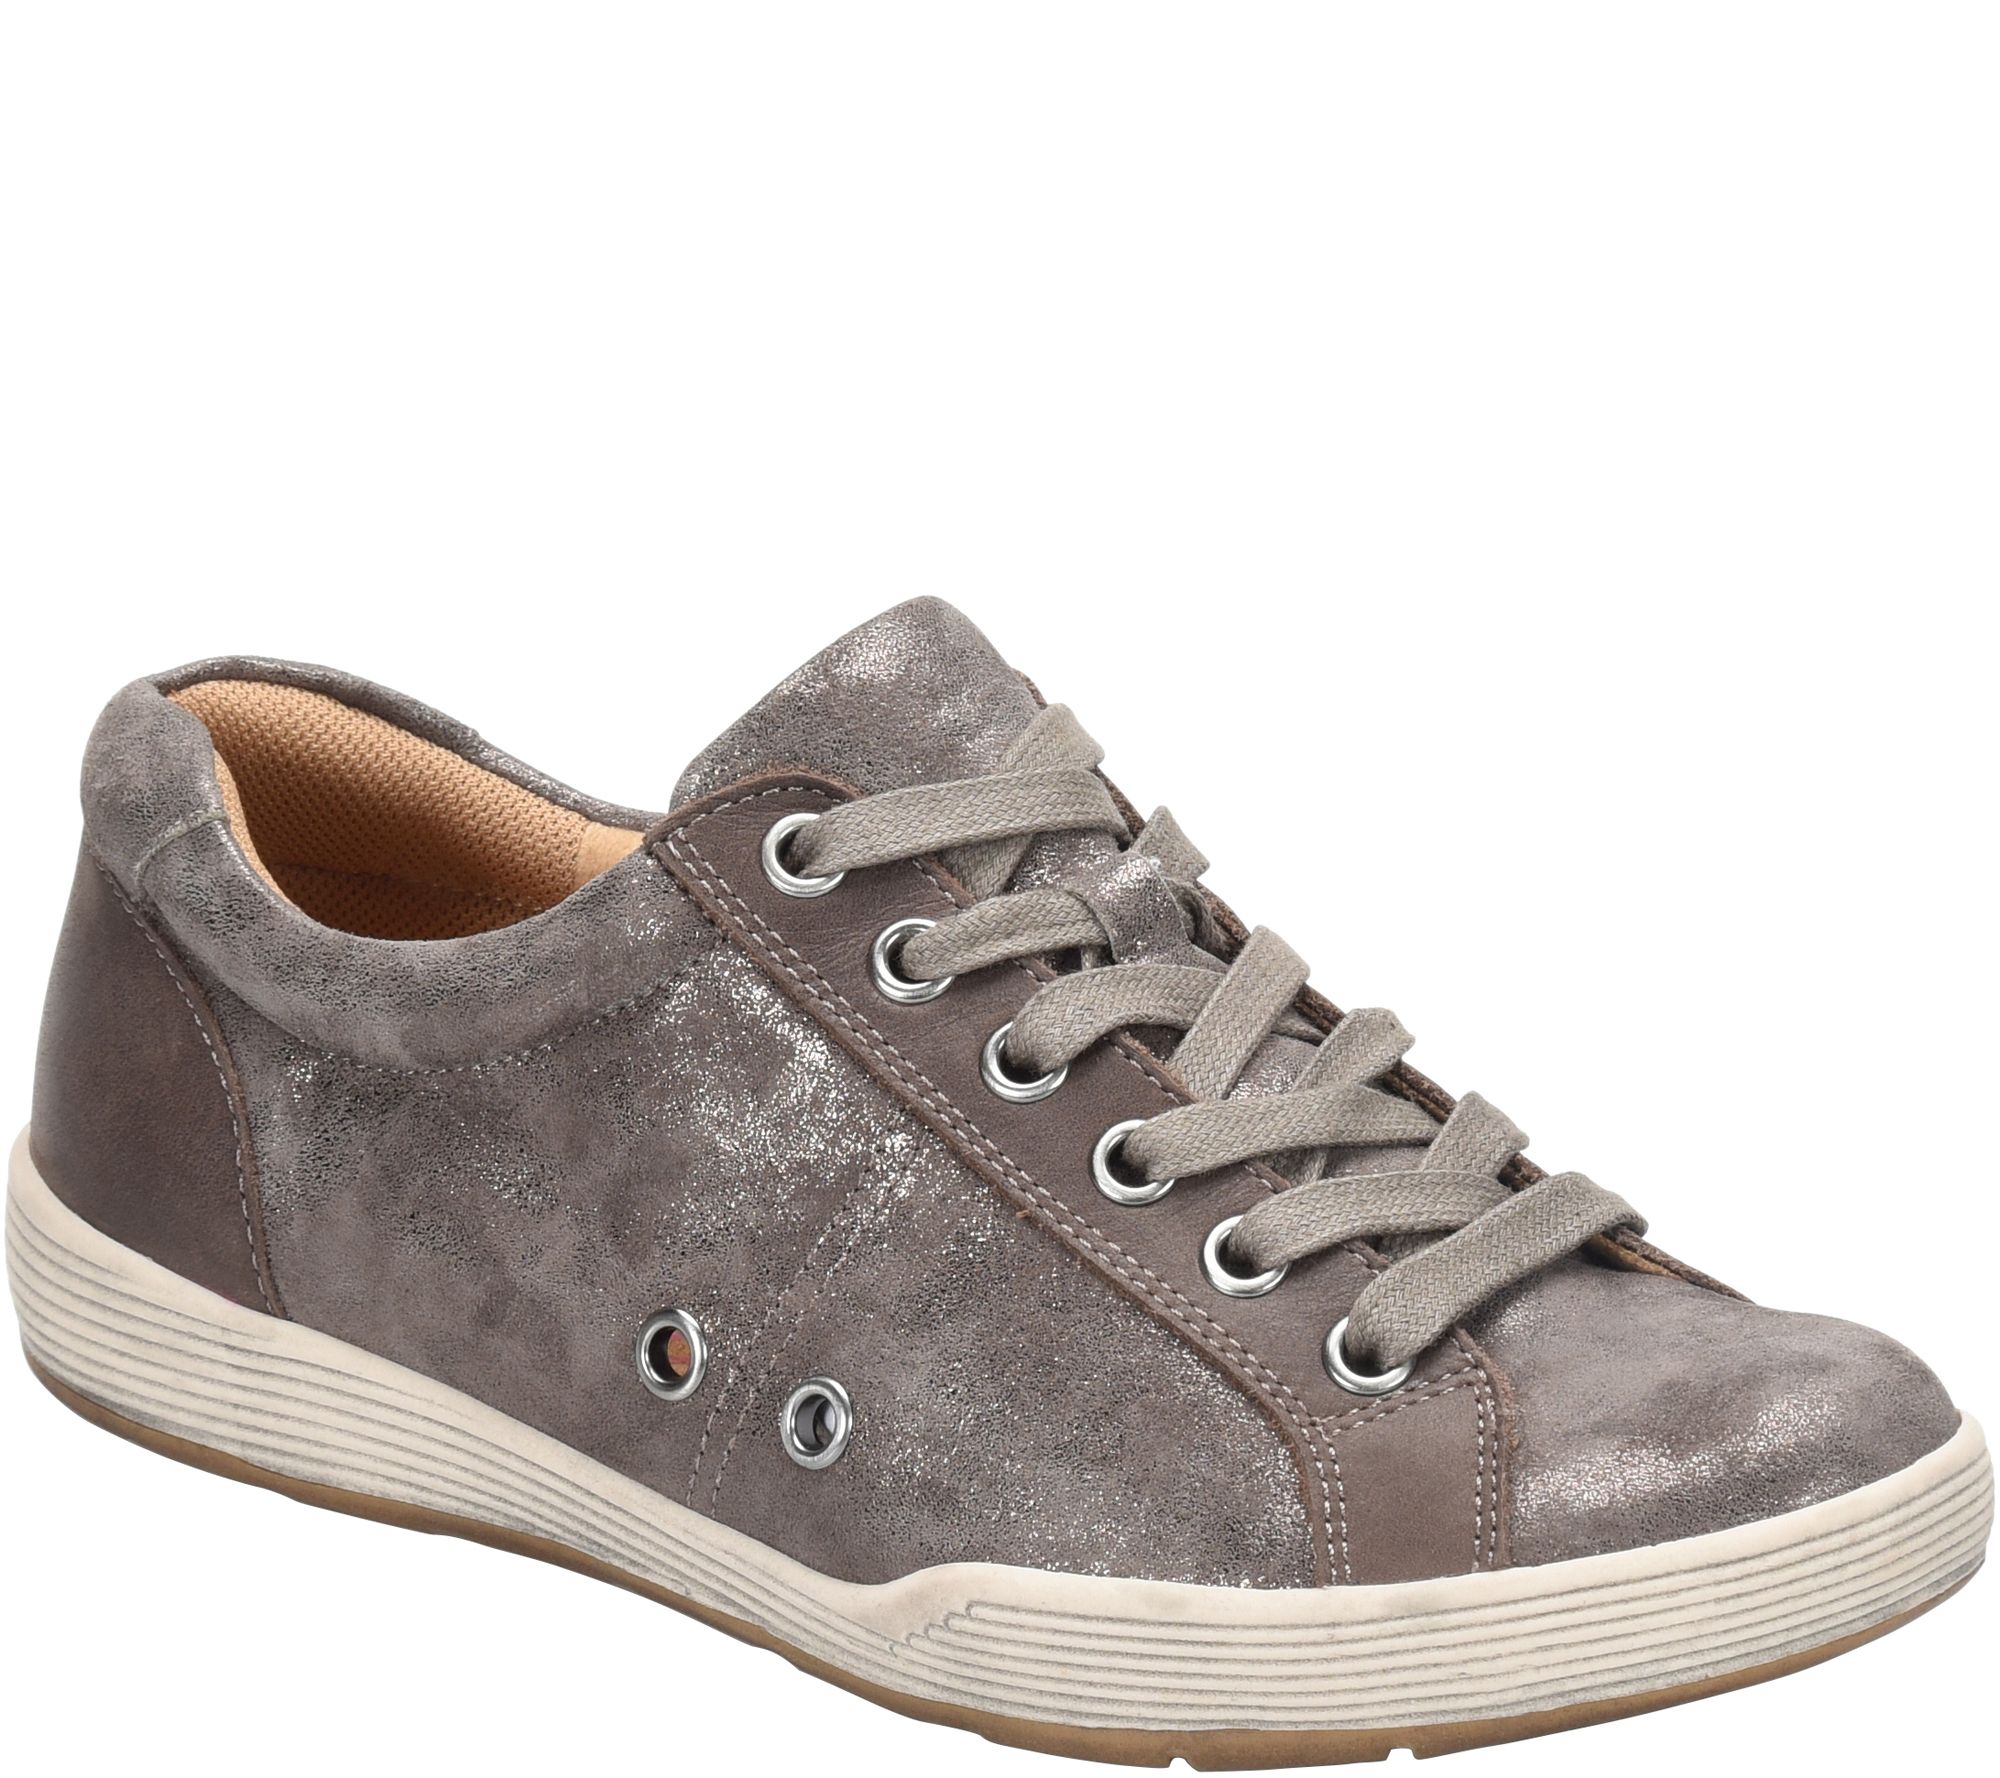 Comfortiva Lace up Leather Sneakers - Lyons - QVC.com